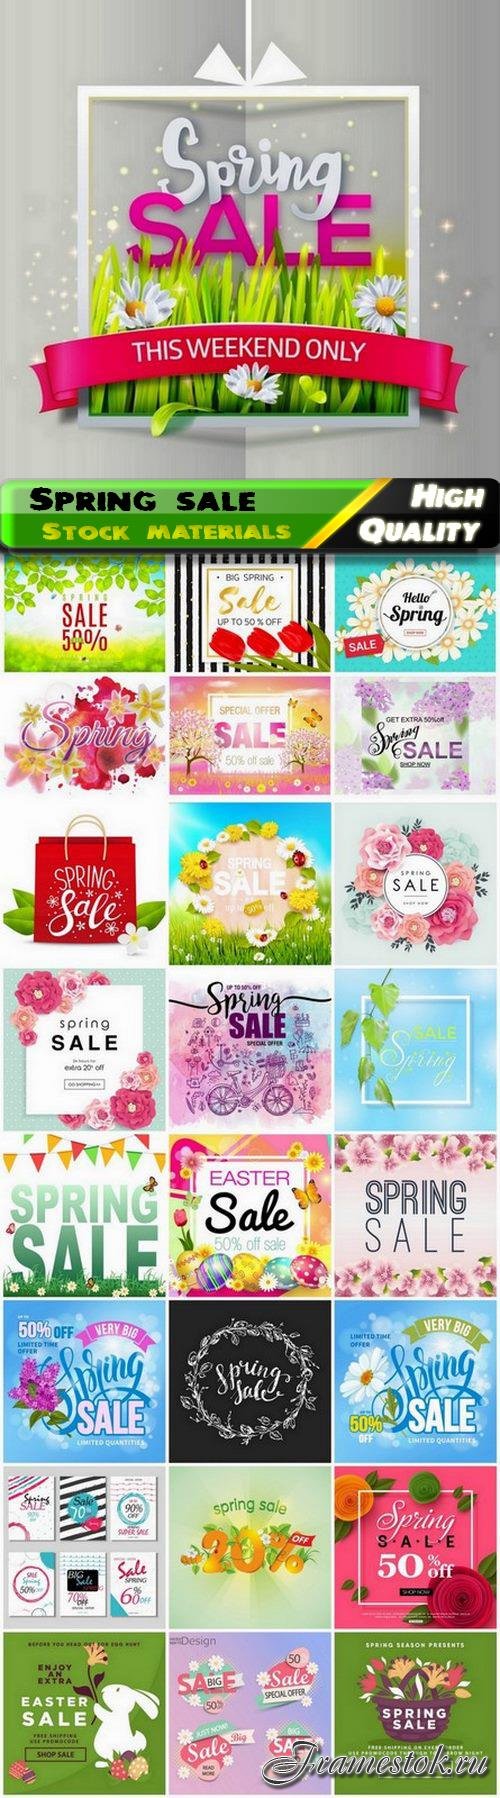 Business flyer poster and card for spring sale and discount 25 Eps